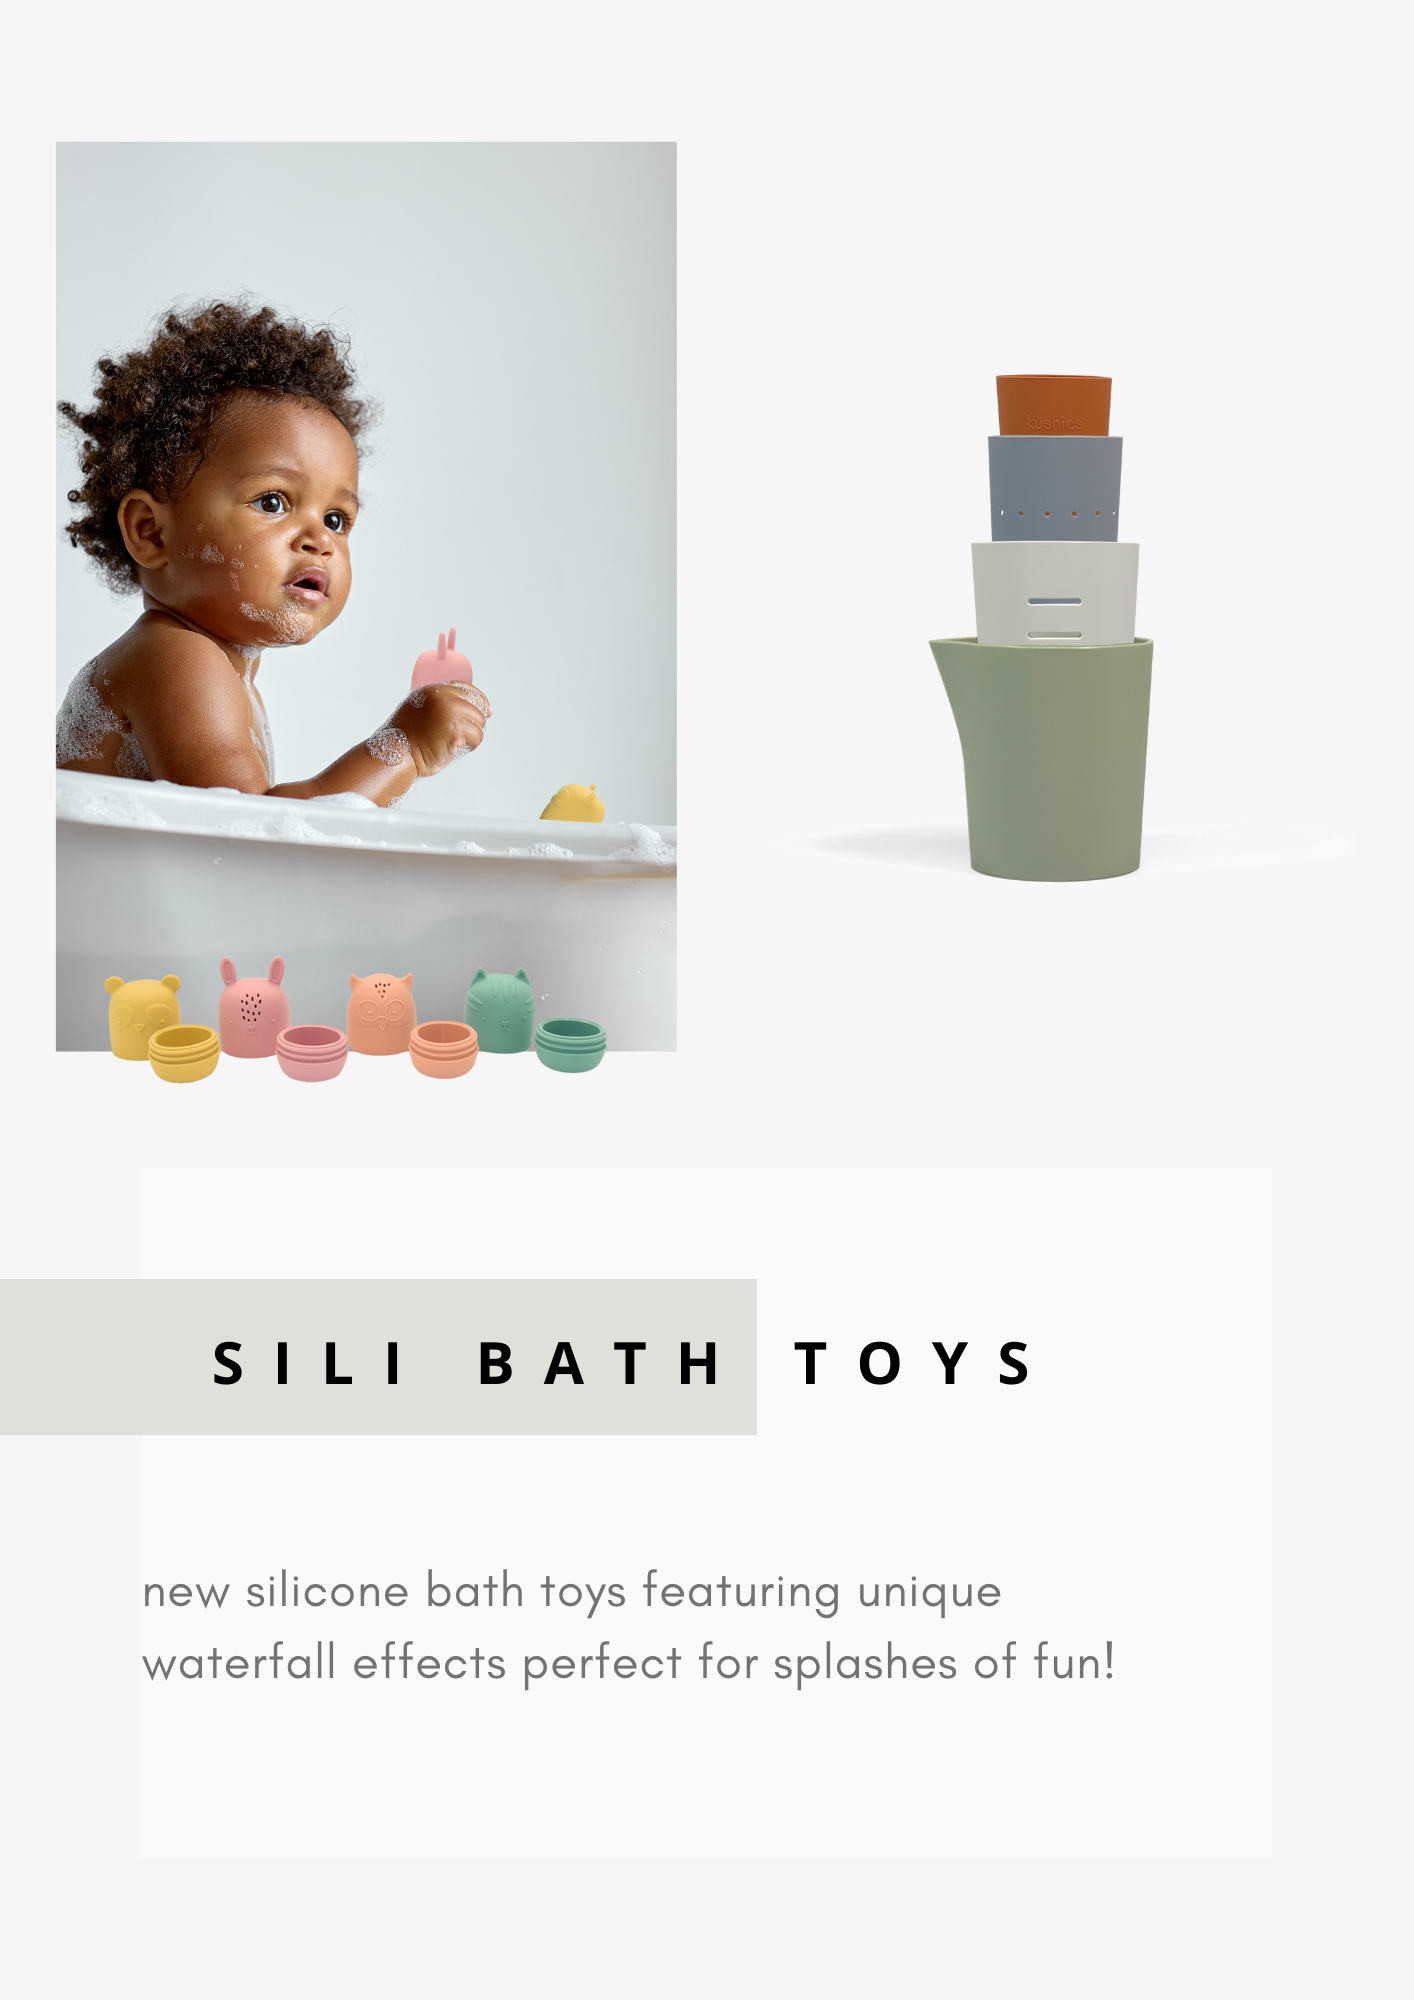 new silicone bath toys featuring unique waterfall effects perfect for splashes of fun!